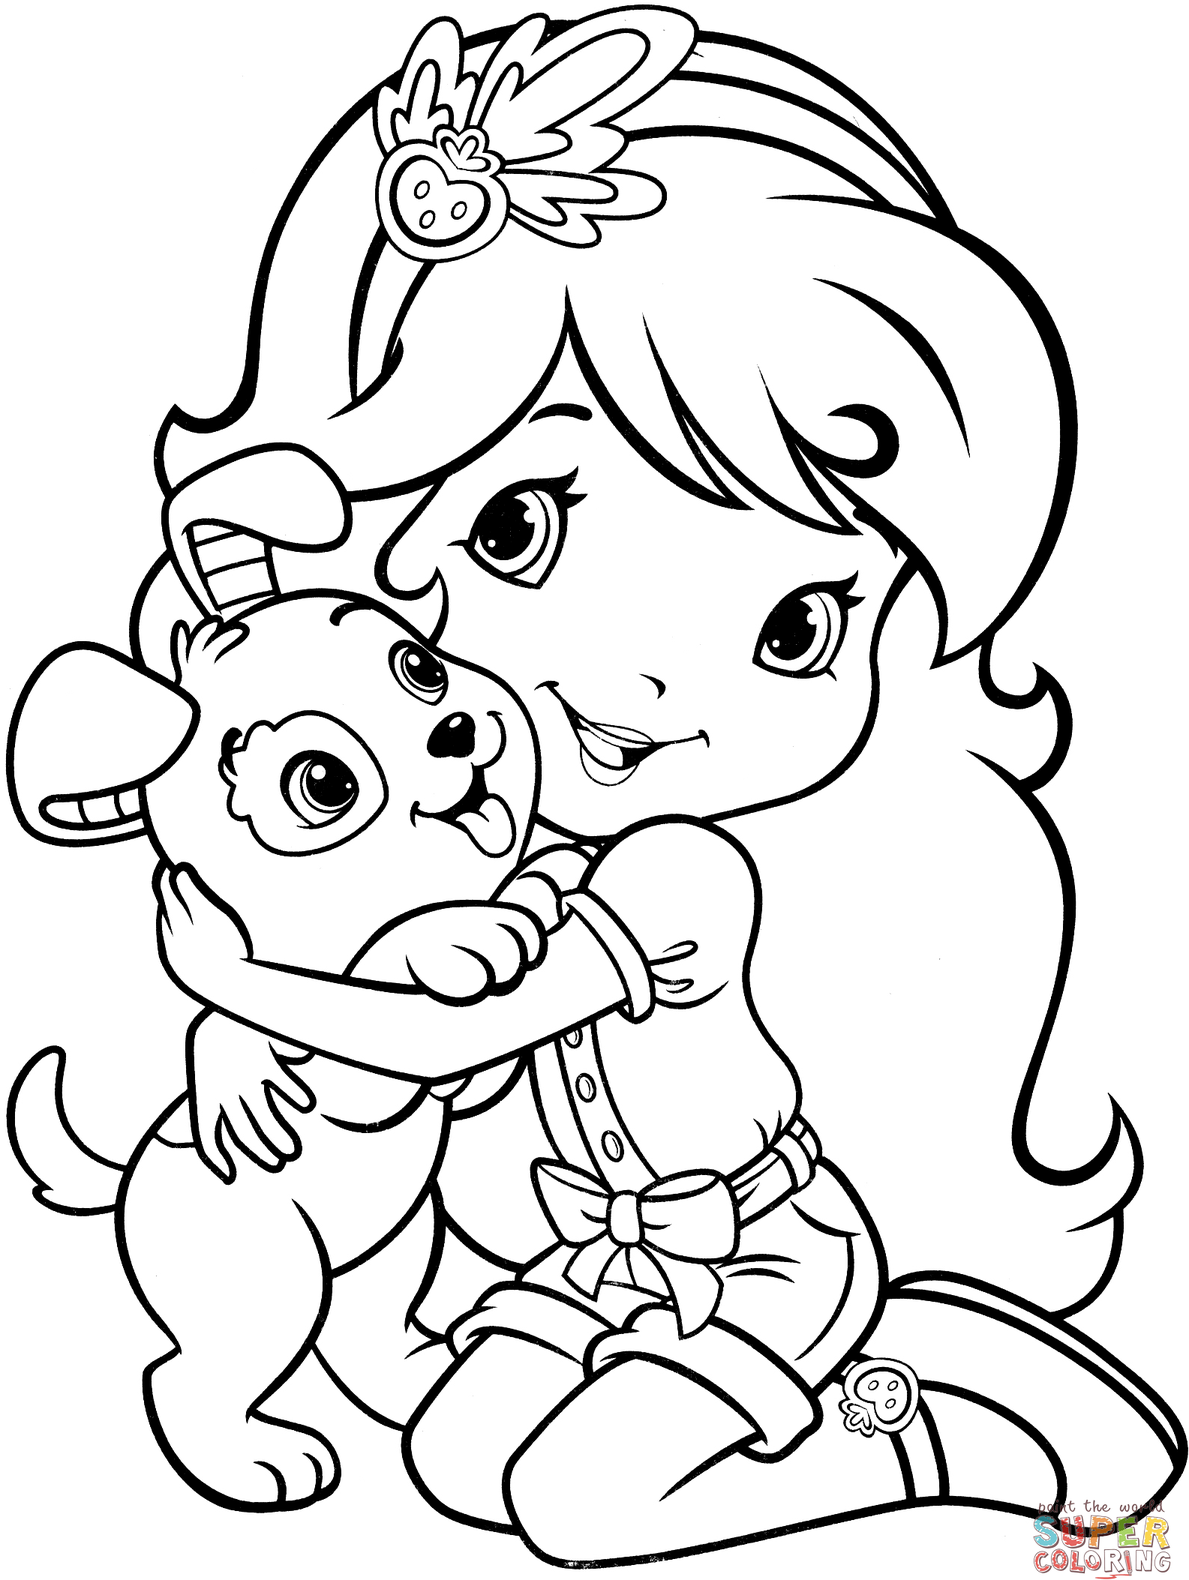 Strawberry Shortcake Cherry Jam Coloring Pages 4